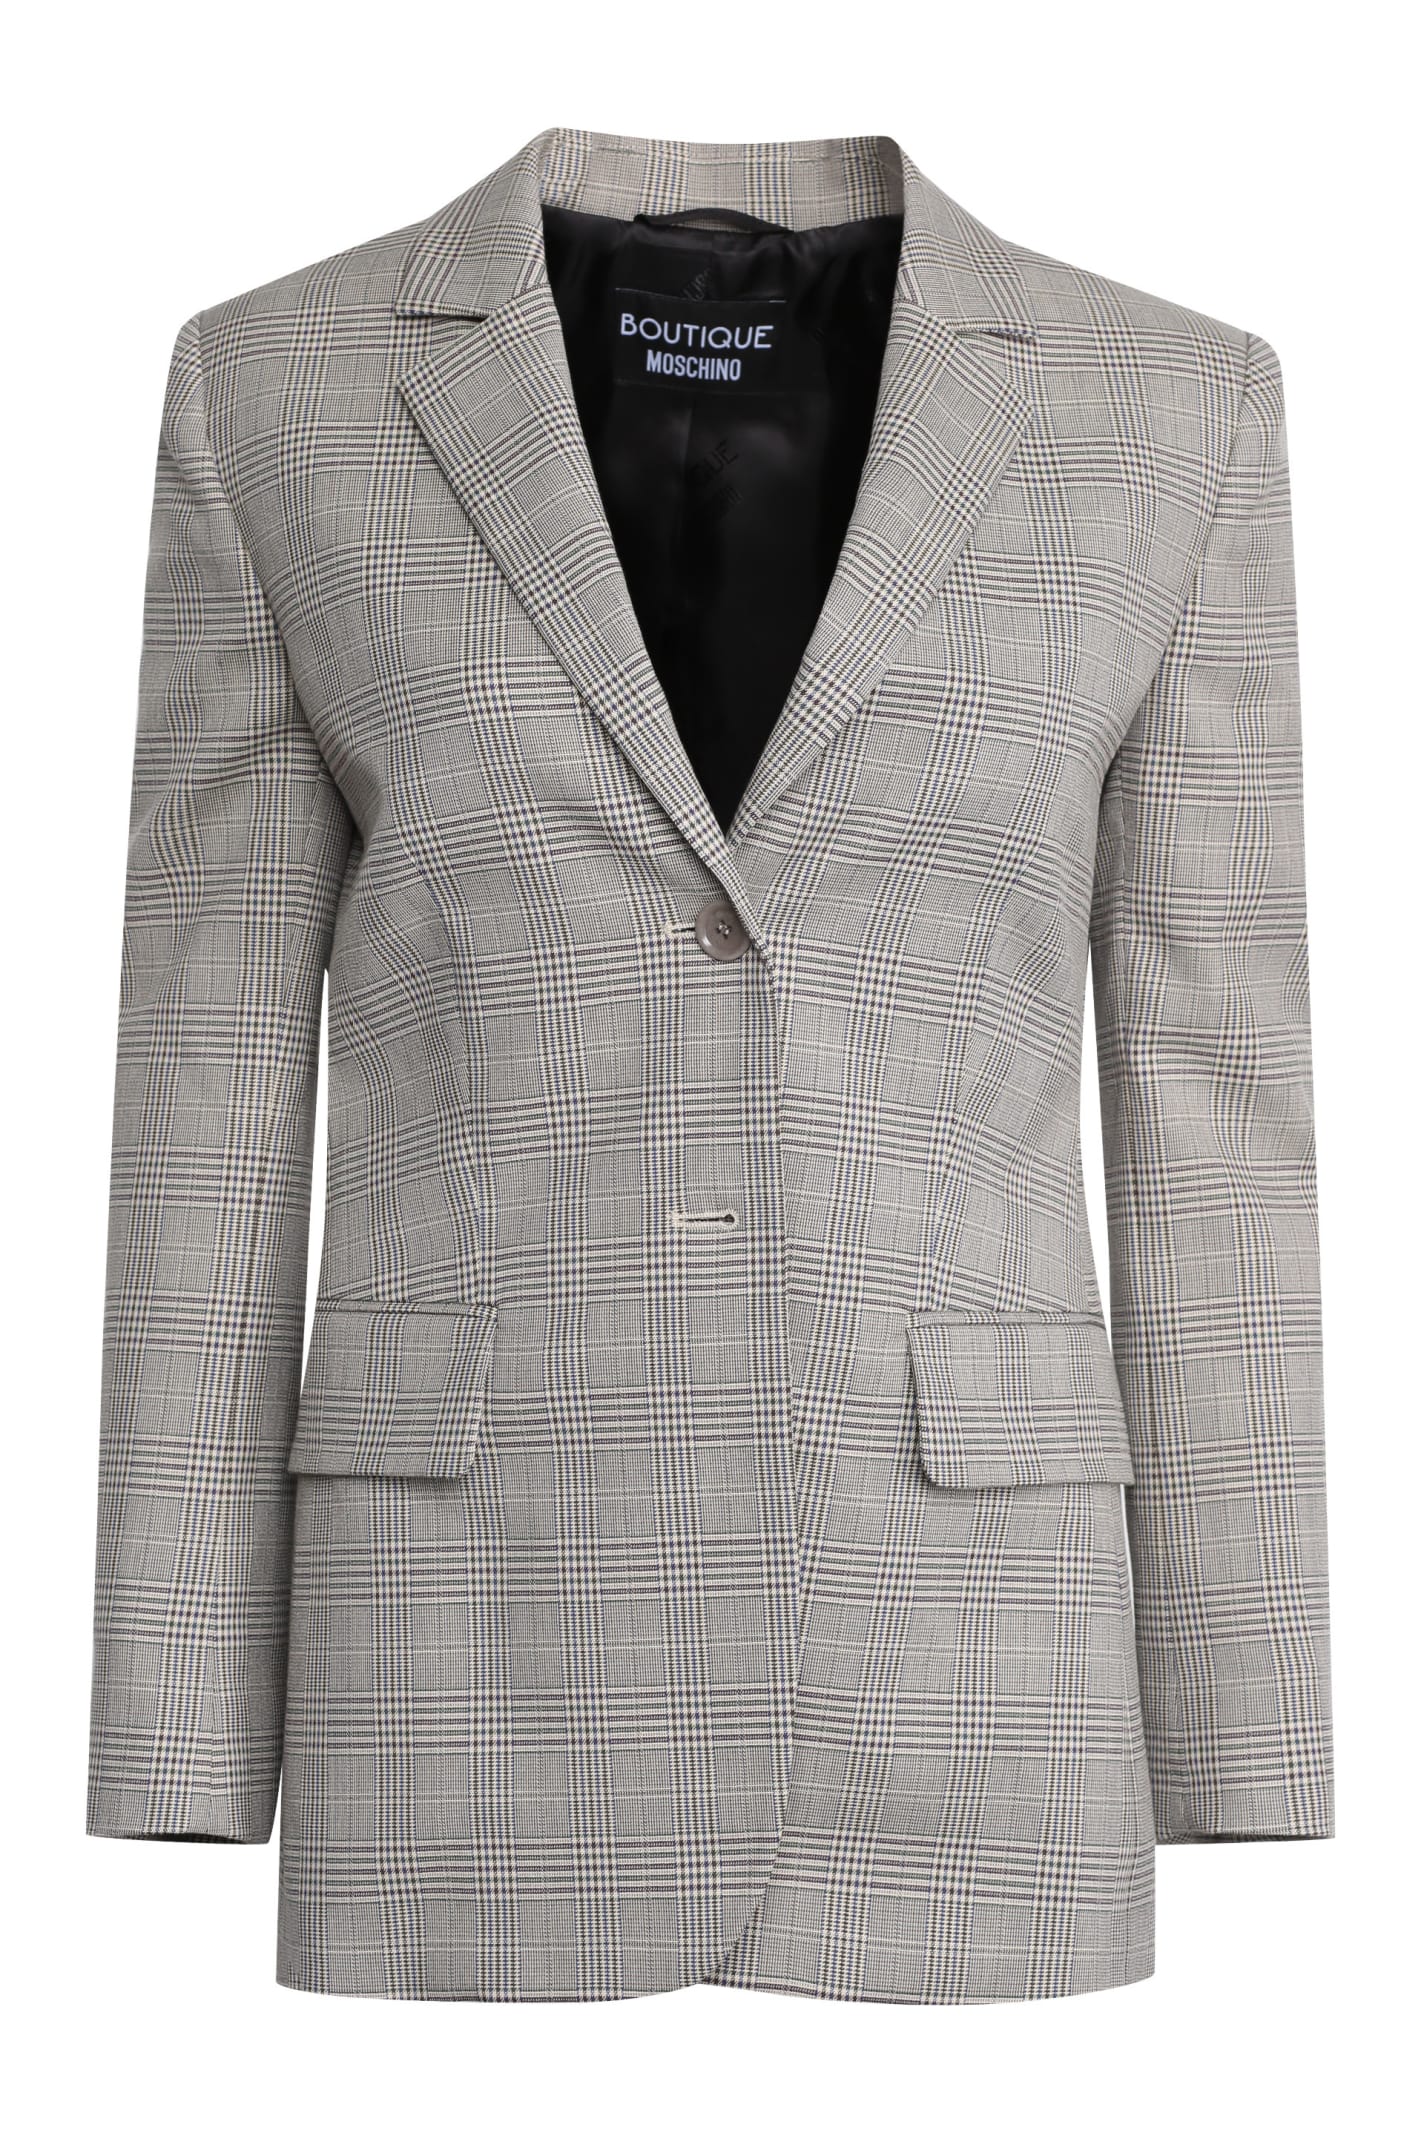 Boutique Moschino Prince Of Wales Checked Blazer